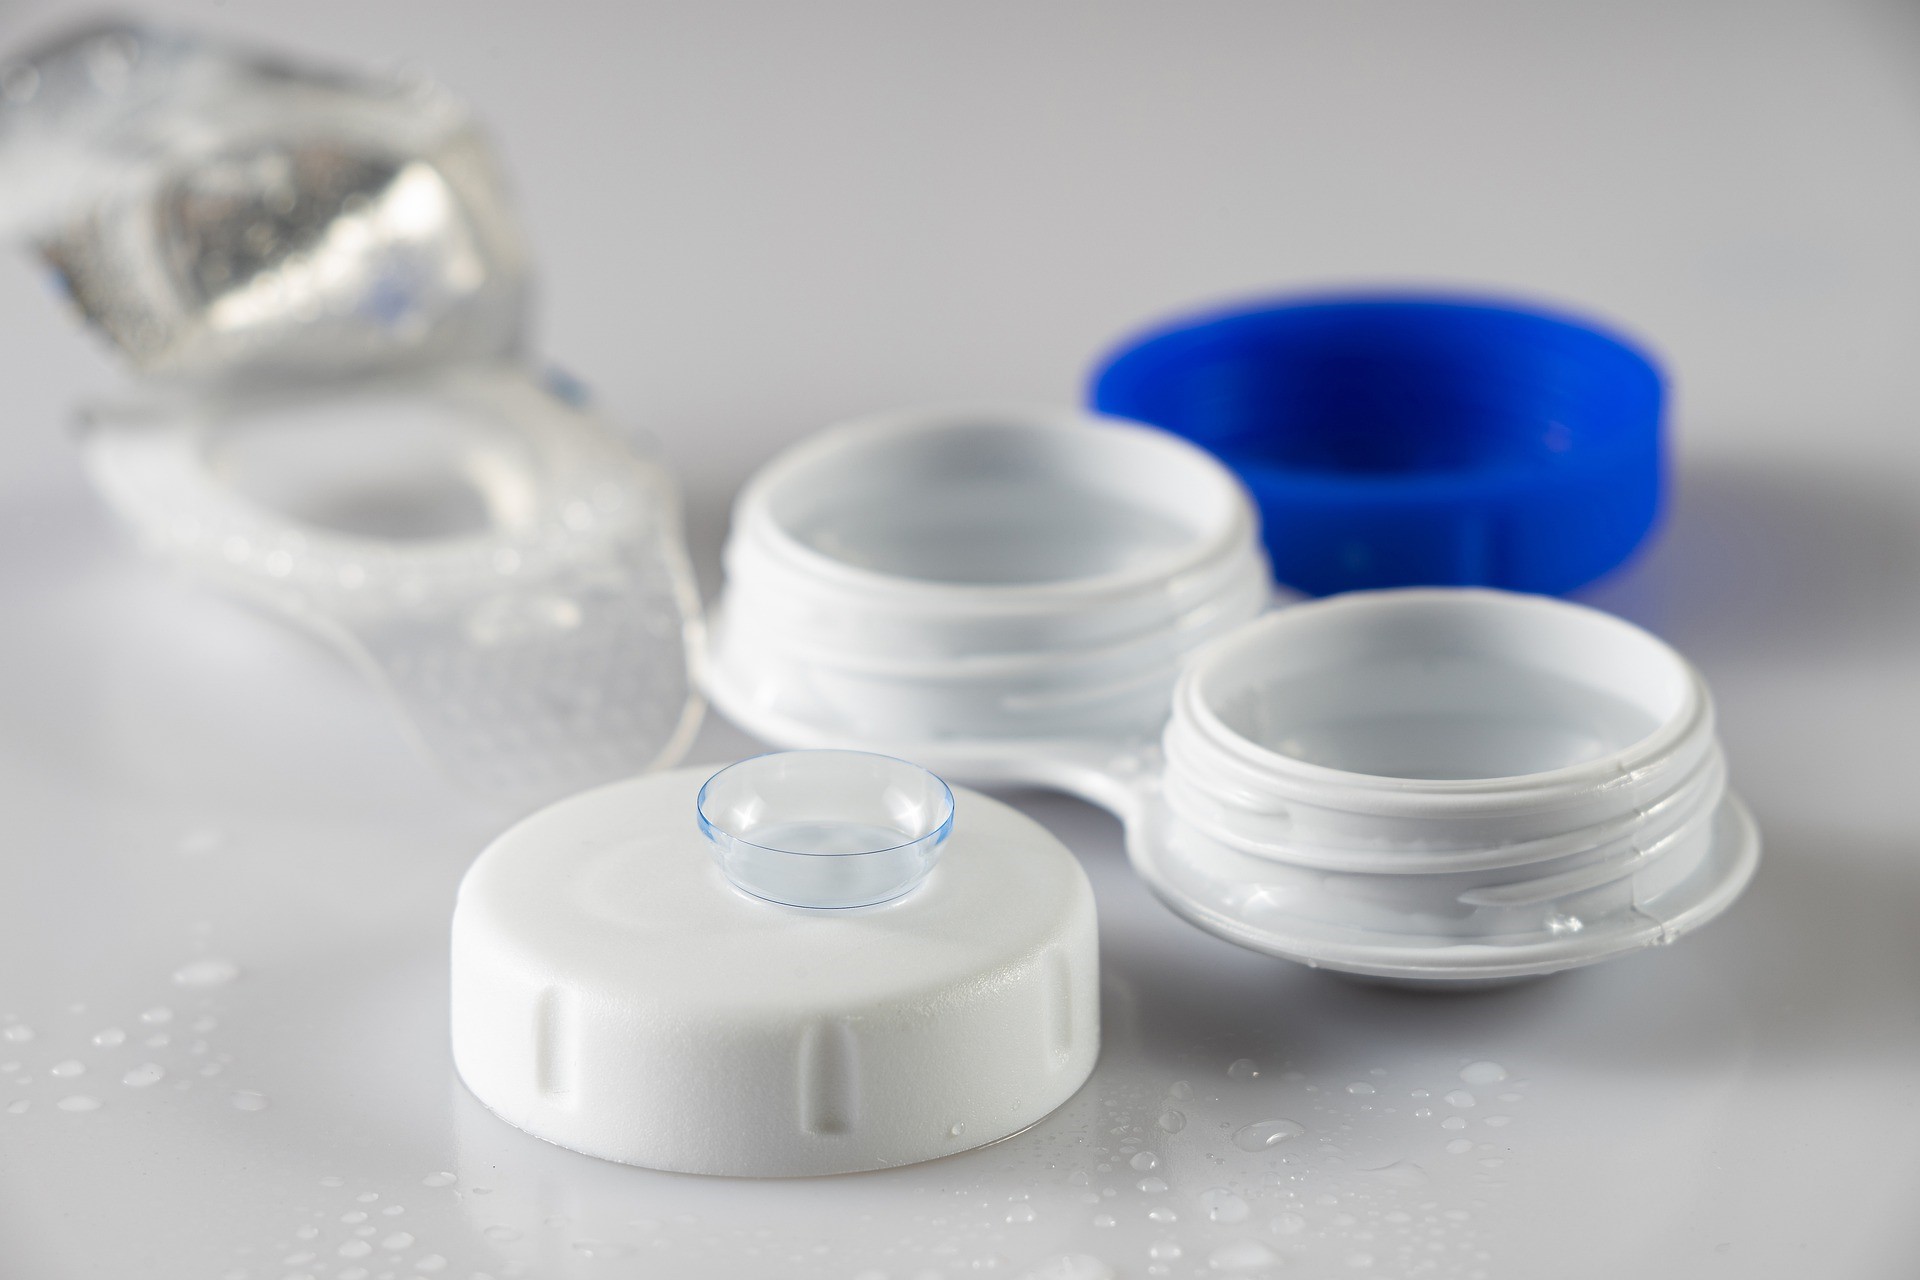 Use a screw-on contact lens case